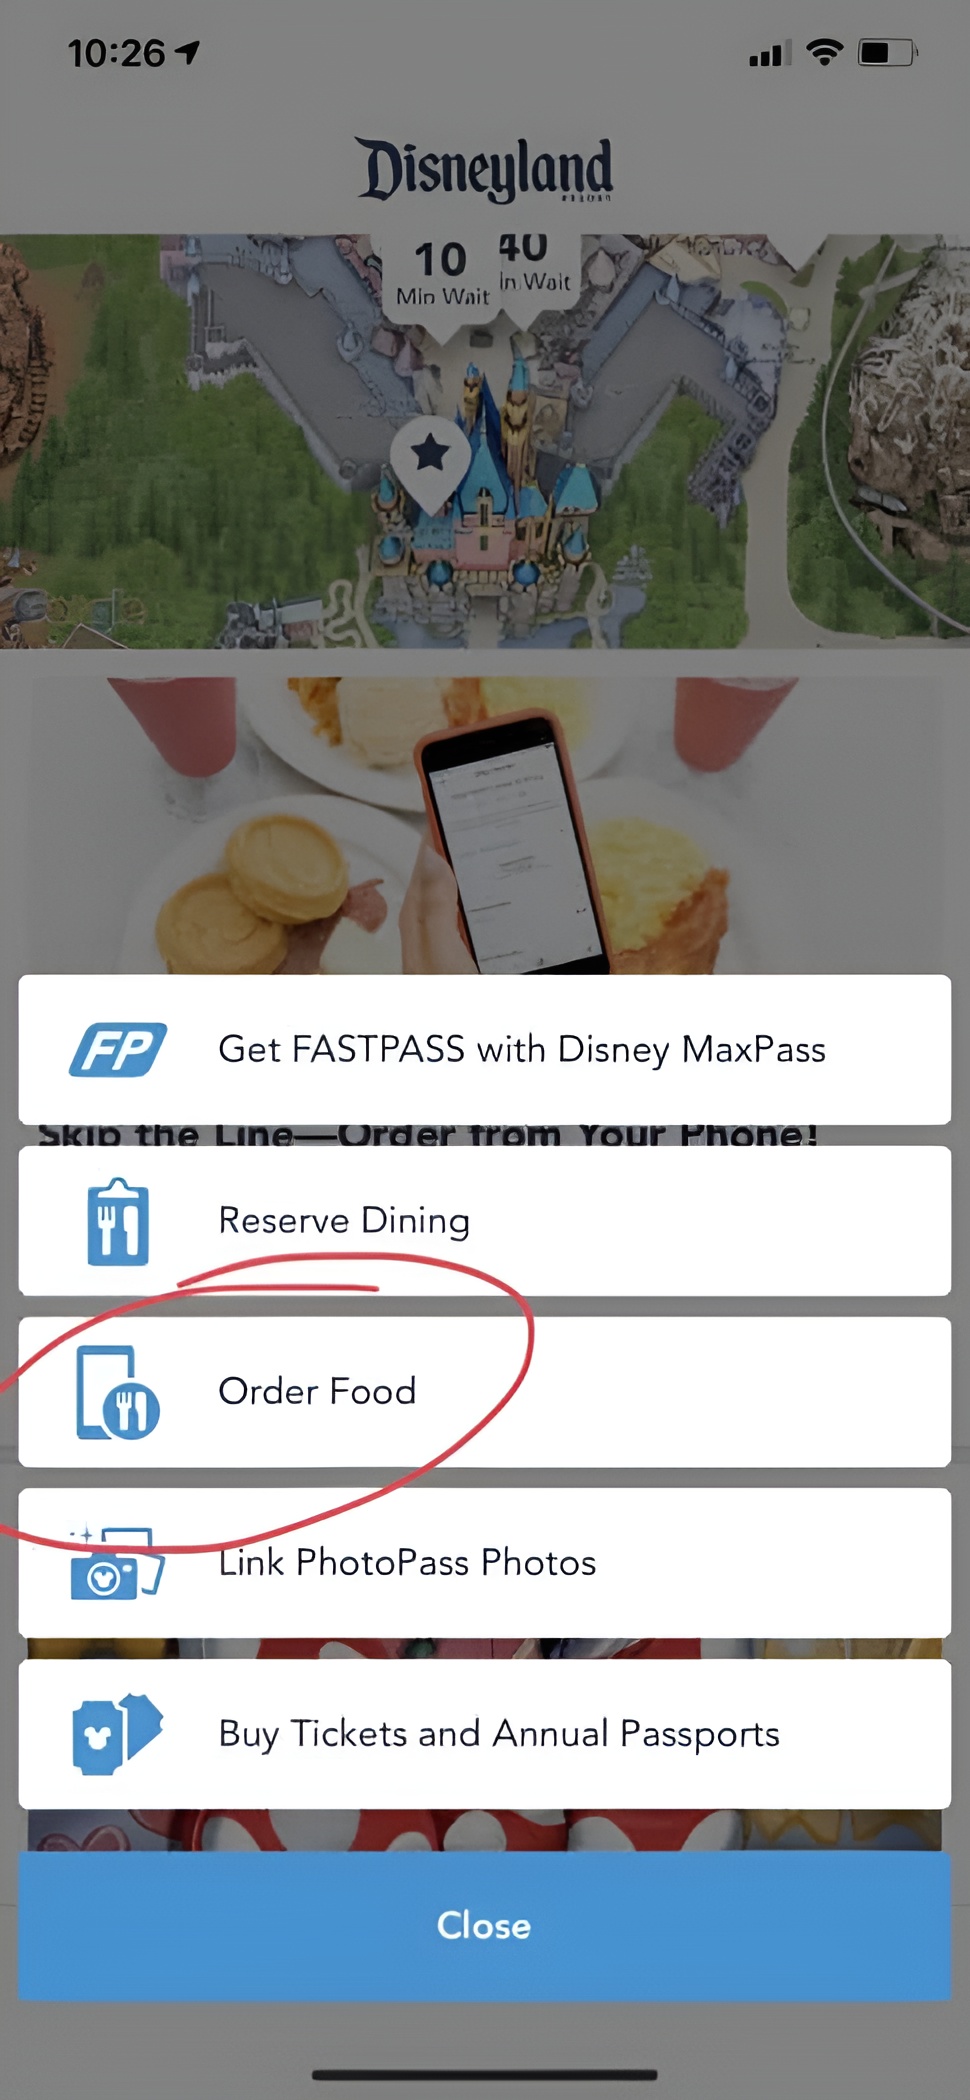 Mobile Ordering